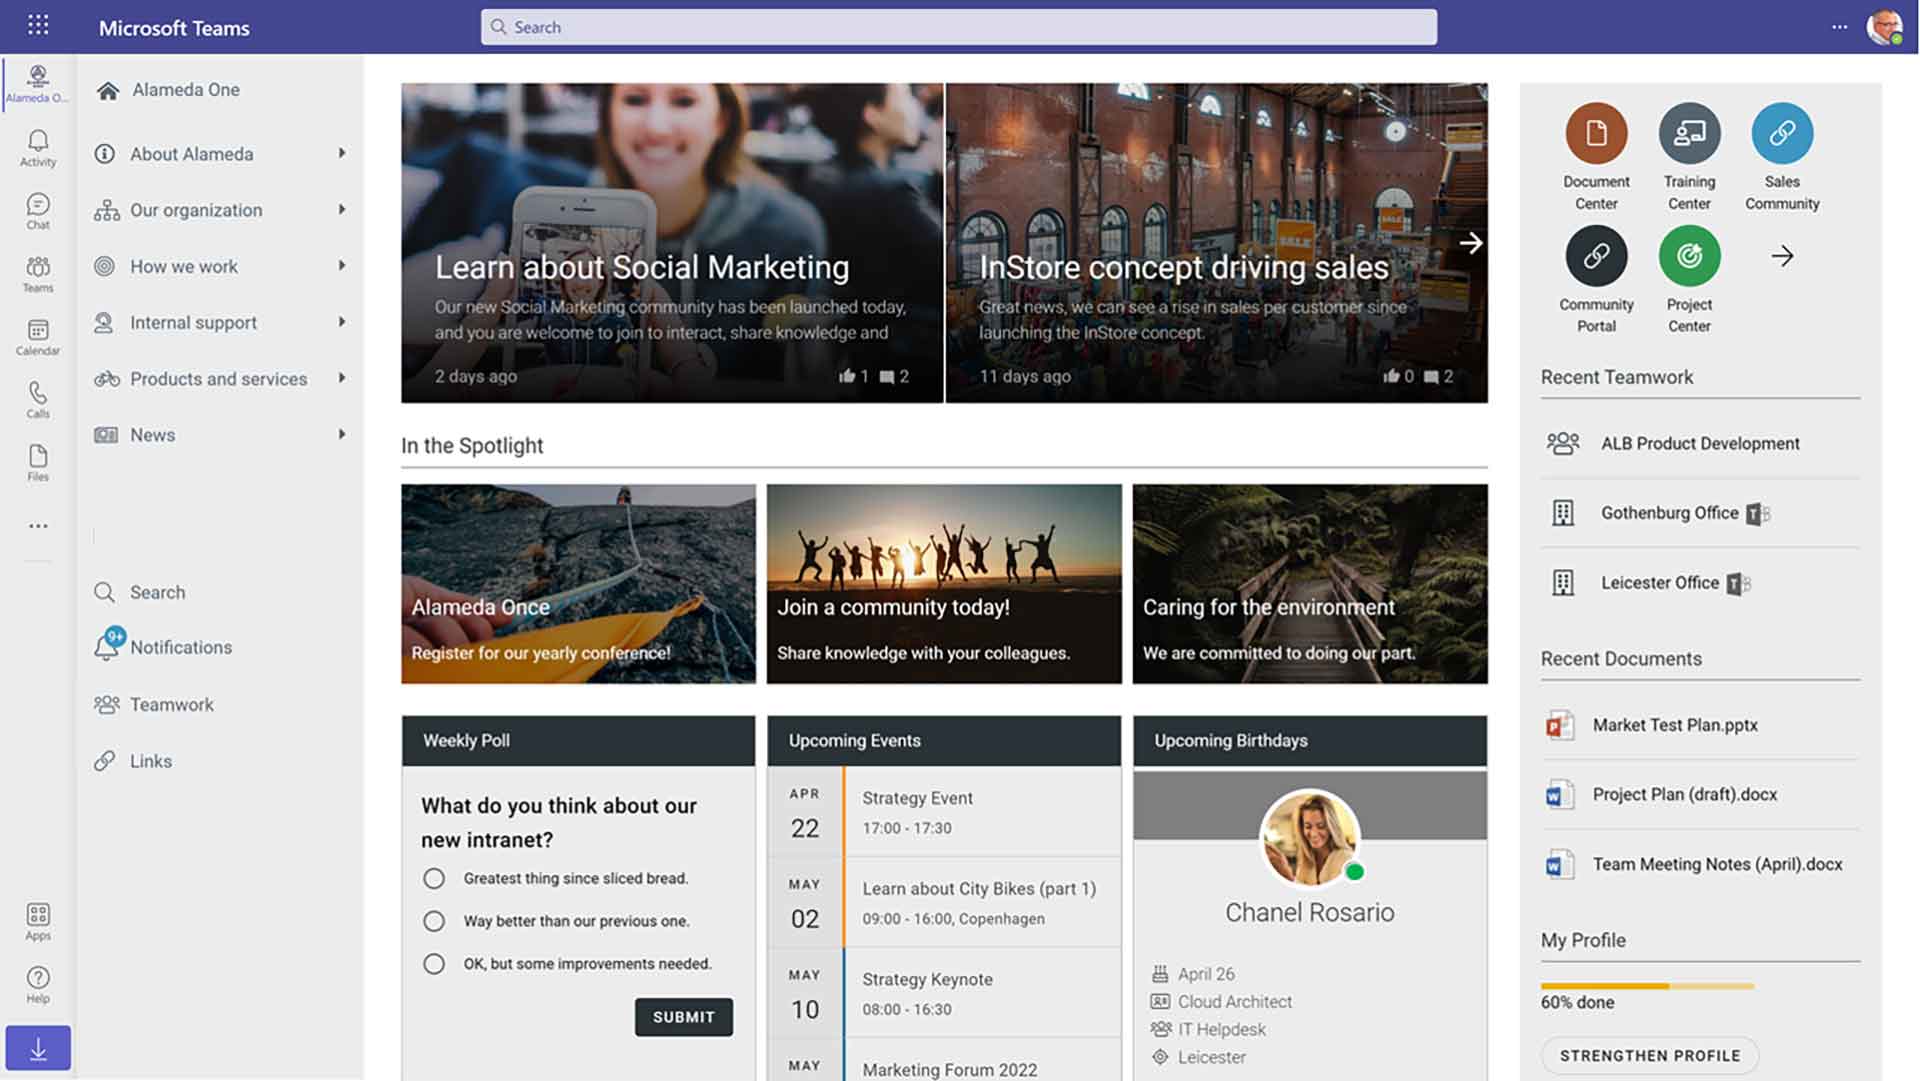 The full intranet experience in Microsoft Teams